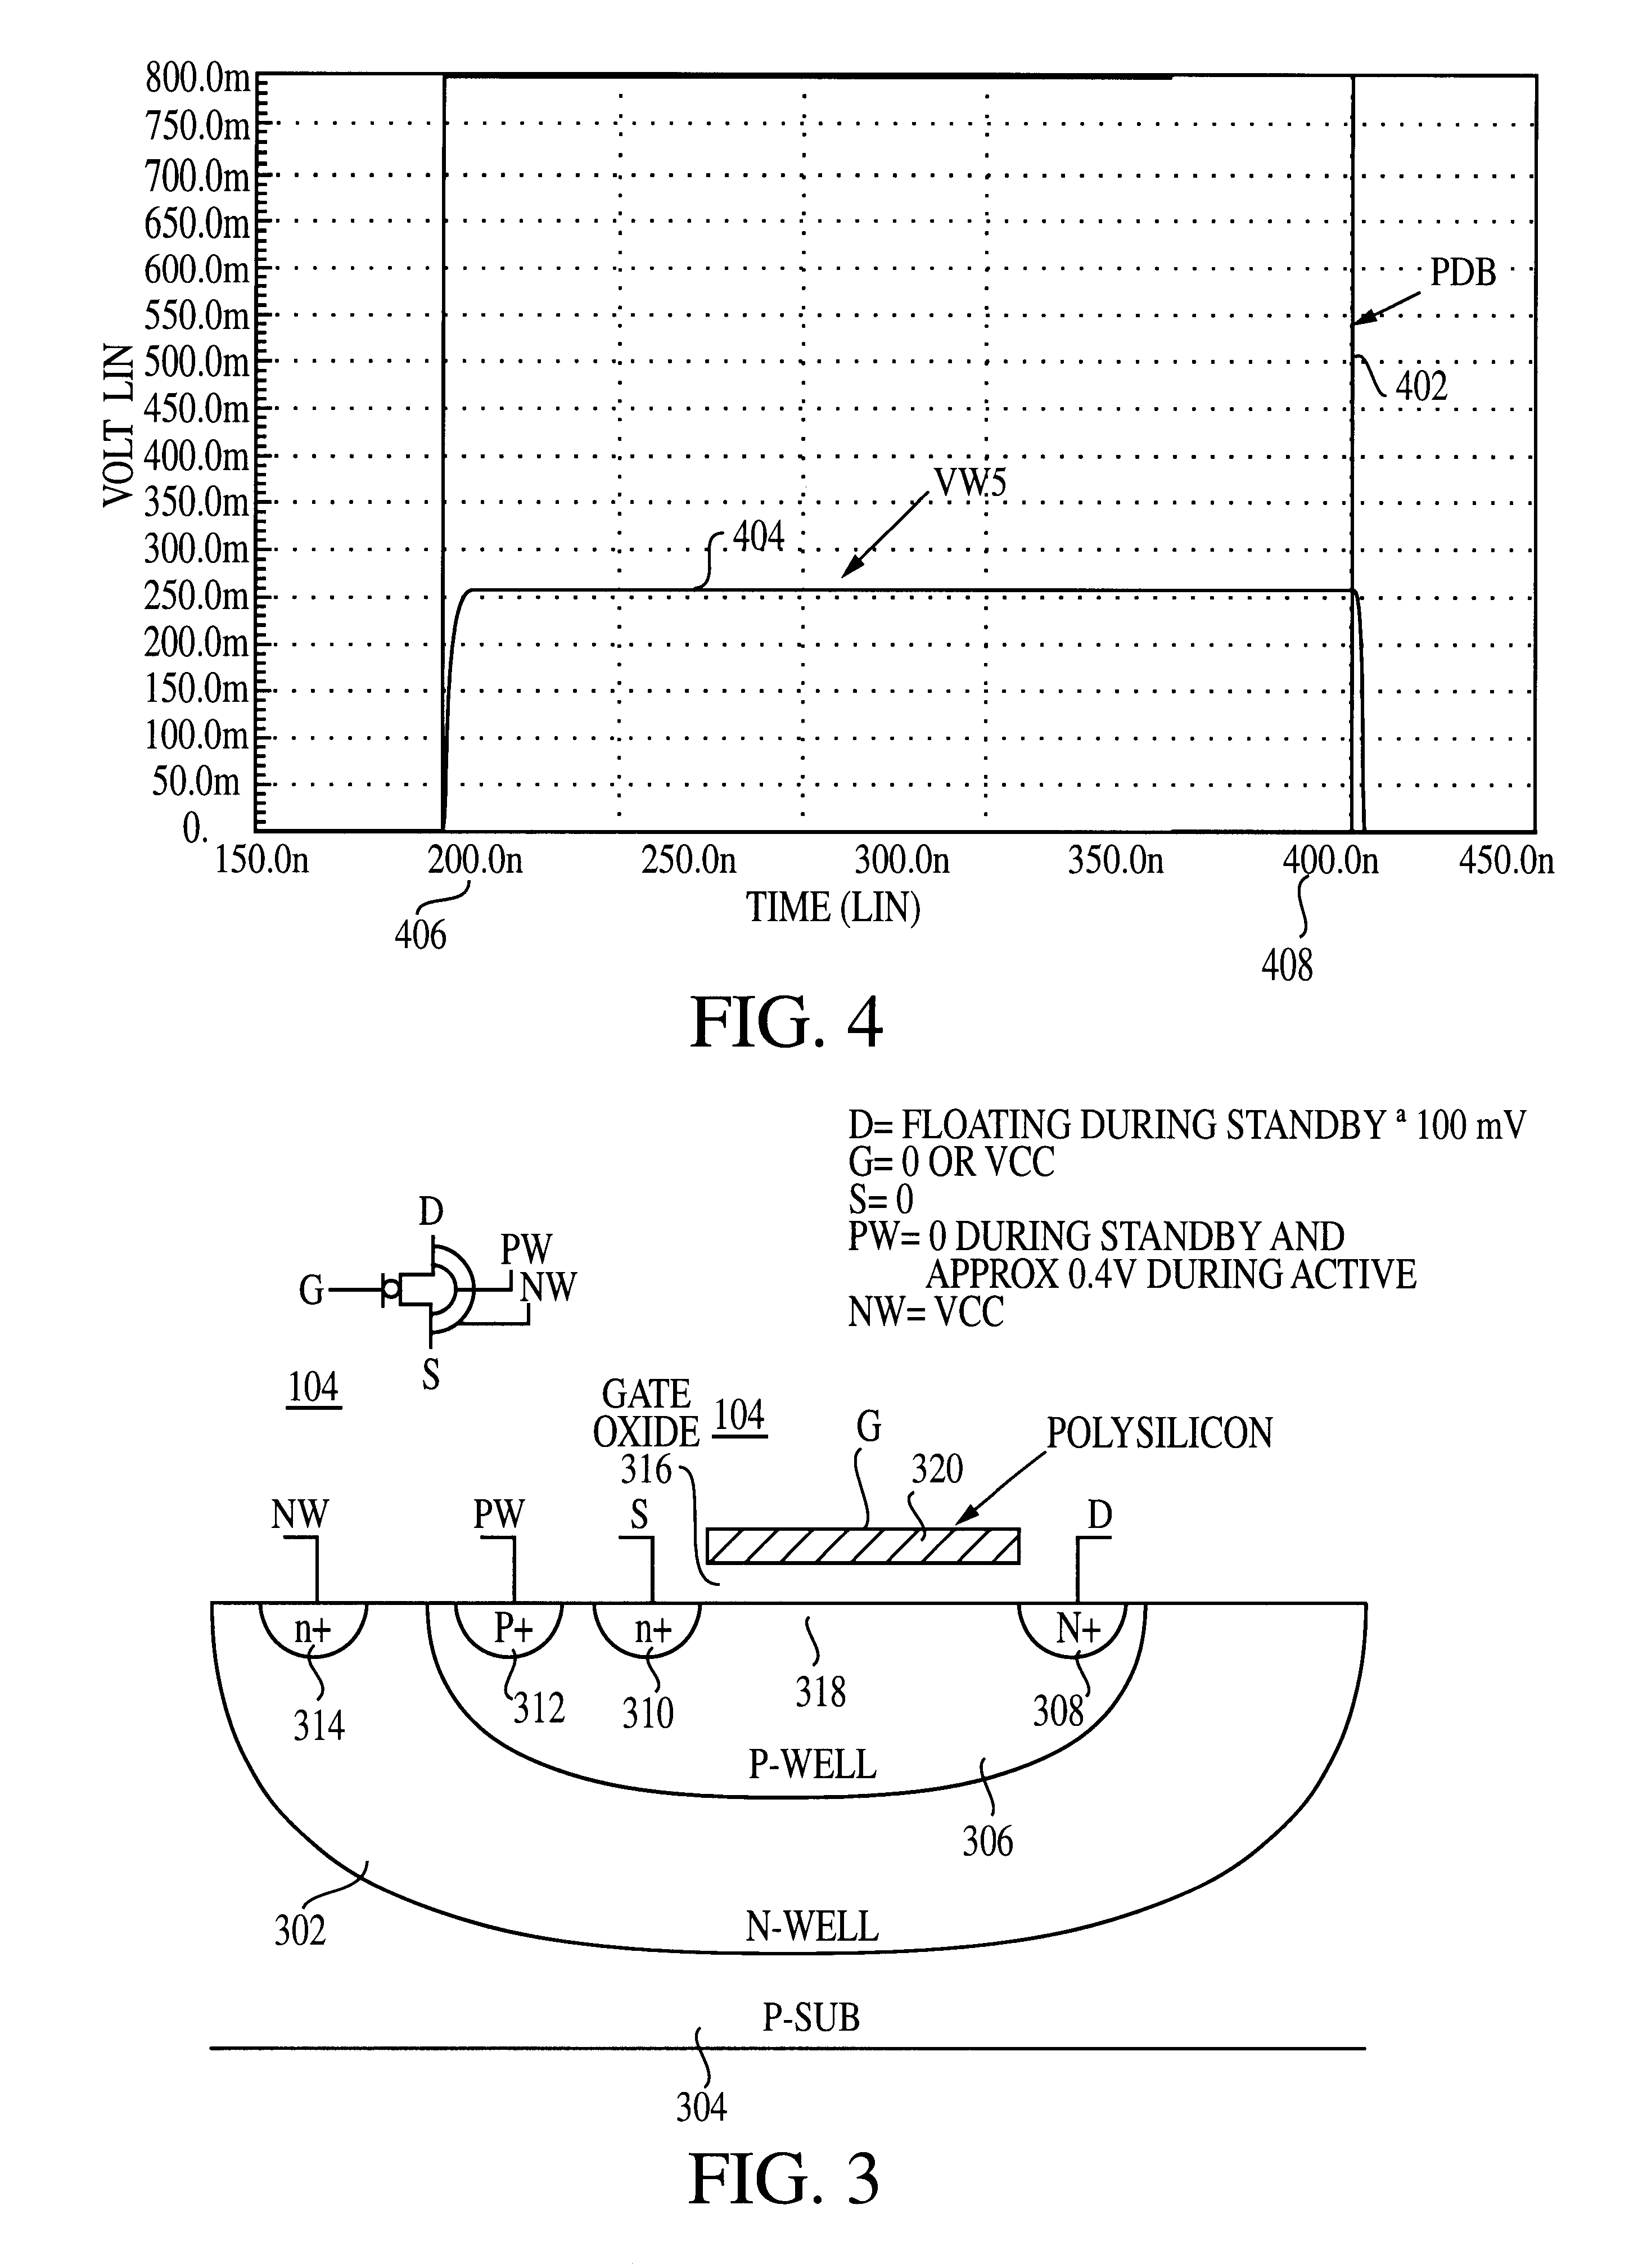 Use of biased high threshold voltage transistor to eliminate standby current in low voltage integrated circuits